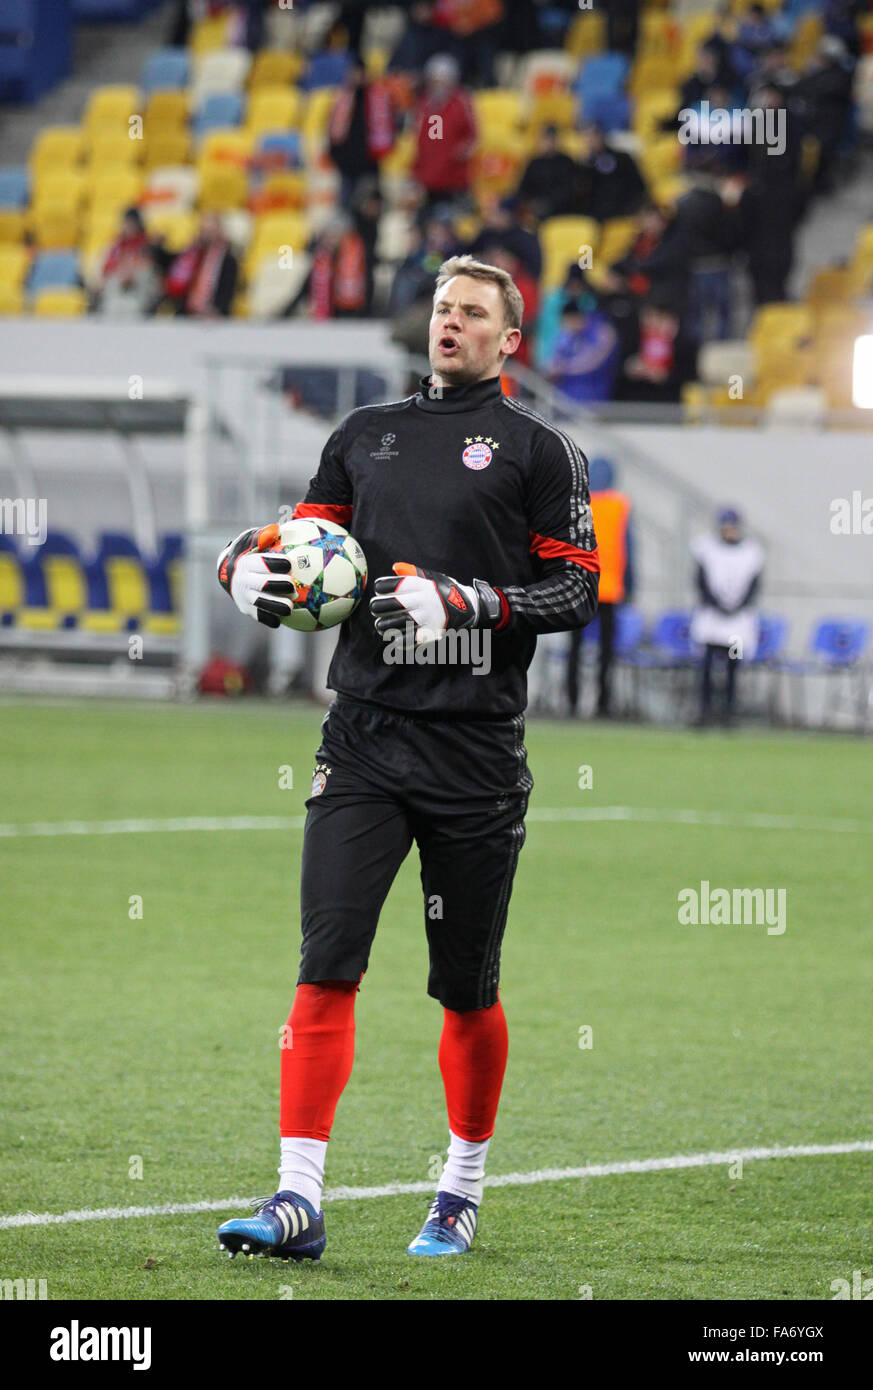 LVIV, UKRAINE - FEBRUARY 17, 2015: Goalkeeper Manuel Neuer of Bayern Munich in action during warm up session before UEFA Champions League game against FC Shakhtar Donetsk Stock Photo